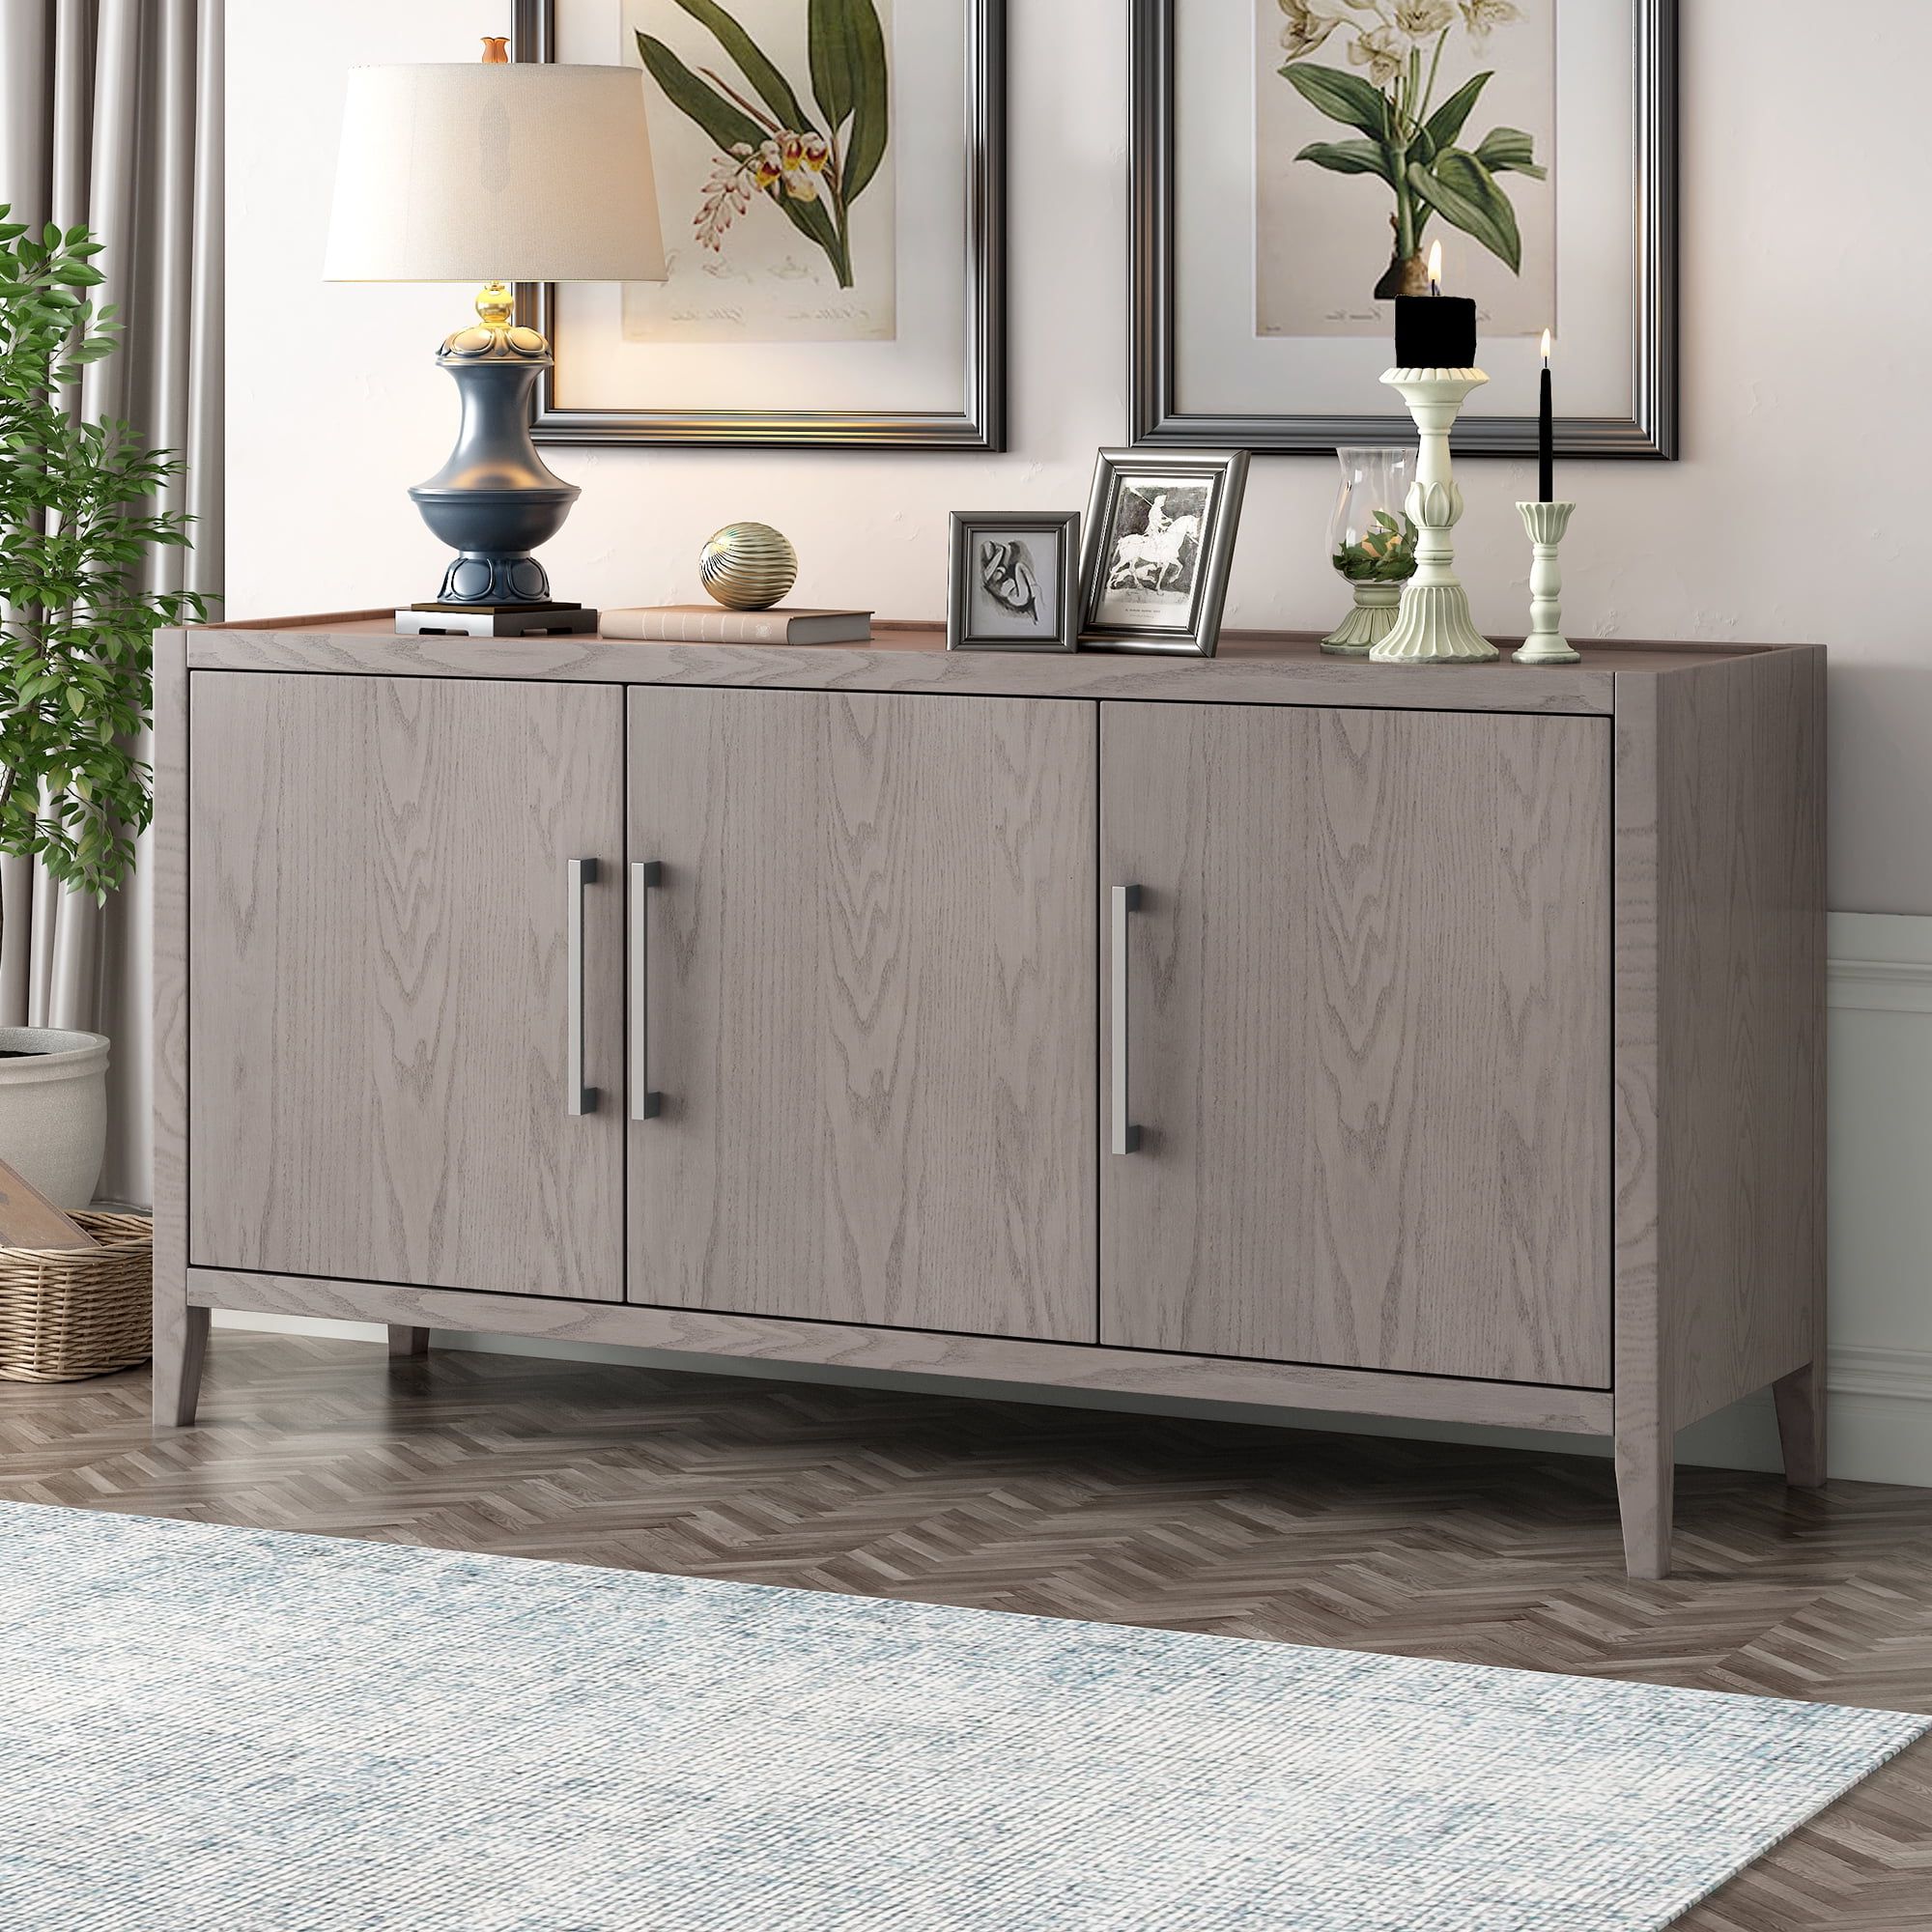 Beige Storage Cabinet, Sideboard Cabinet Furniture, Accent Storage Cabinet  With 3 Doors And Adjustable Shelves, Retro Wood Buffet Sideboard, Kamida Storage  Cabinet For Kitchen Dining Room Living Room – Walmart Inside 3 Door Accent Cabinet Sideboards (View 4 of 20)